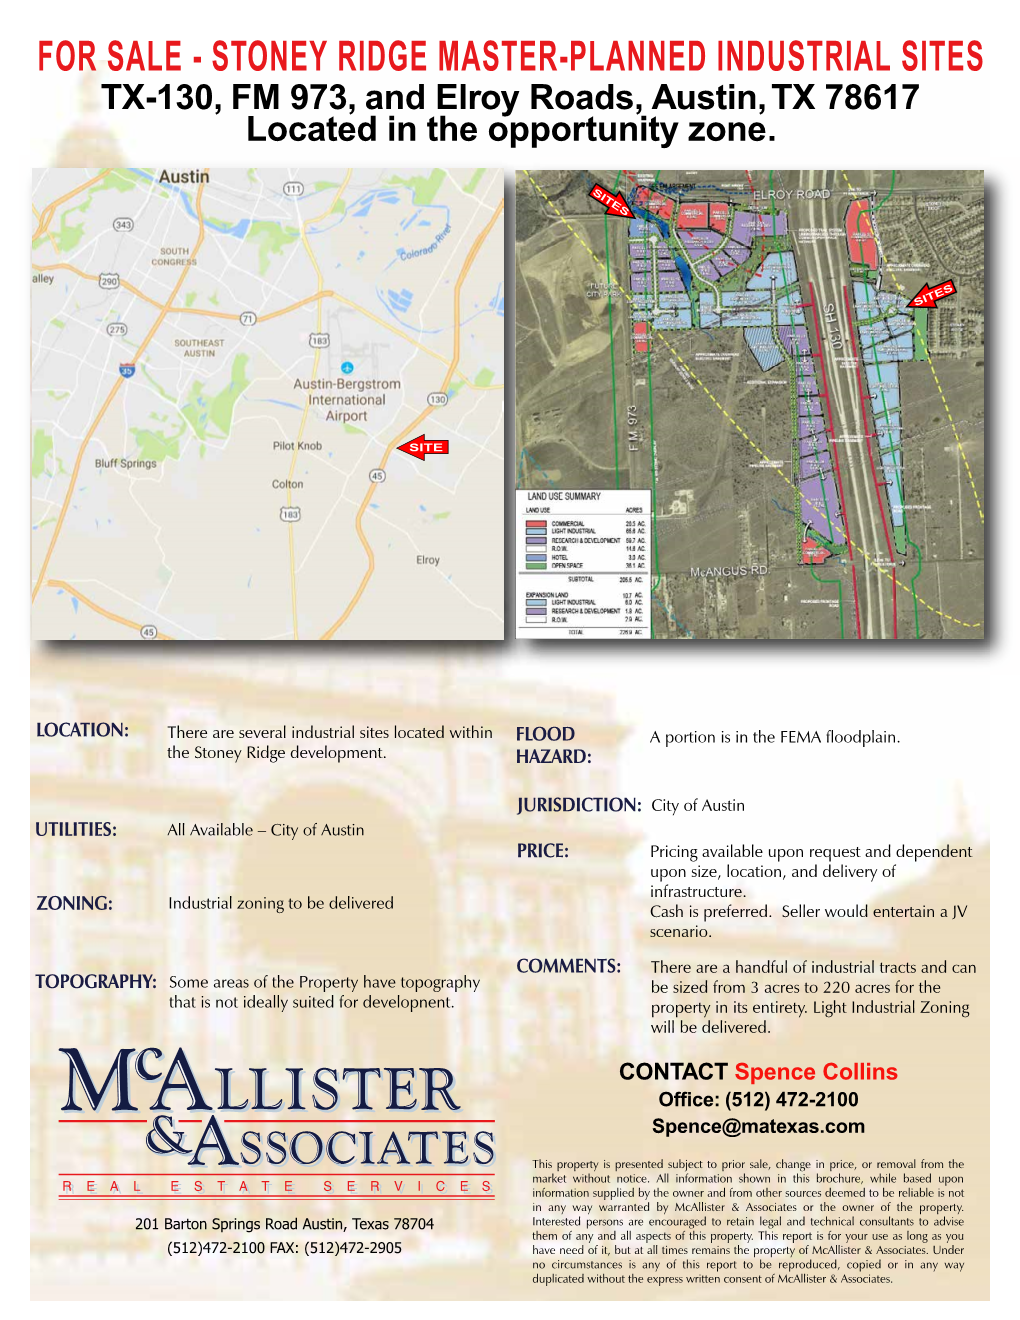 STONEY RIDGE MASTER-PLANNED INDUSTRIAL SITES TX-130, FM 973, and Elroy Roads, Austin, TX 78617 Located in the Opportunity Zone